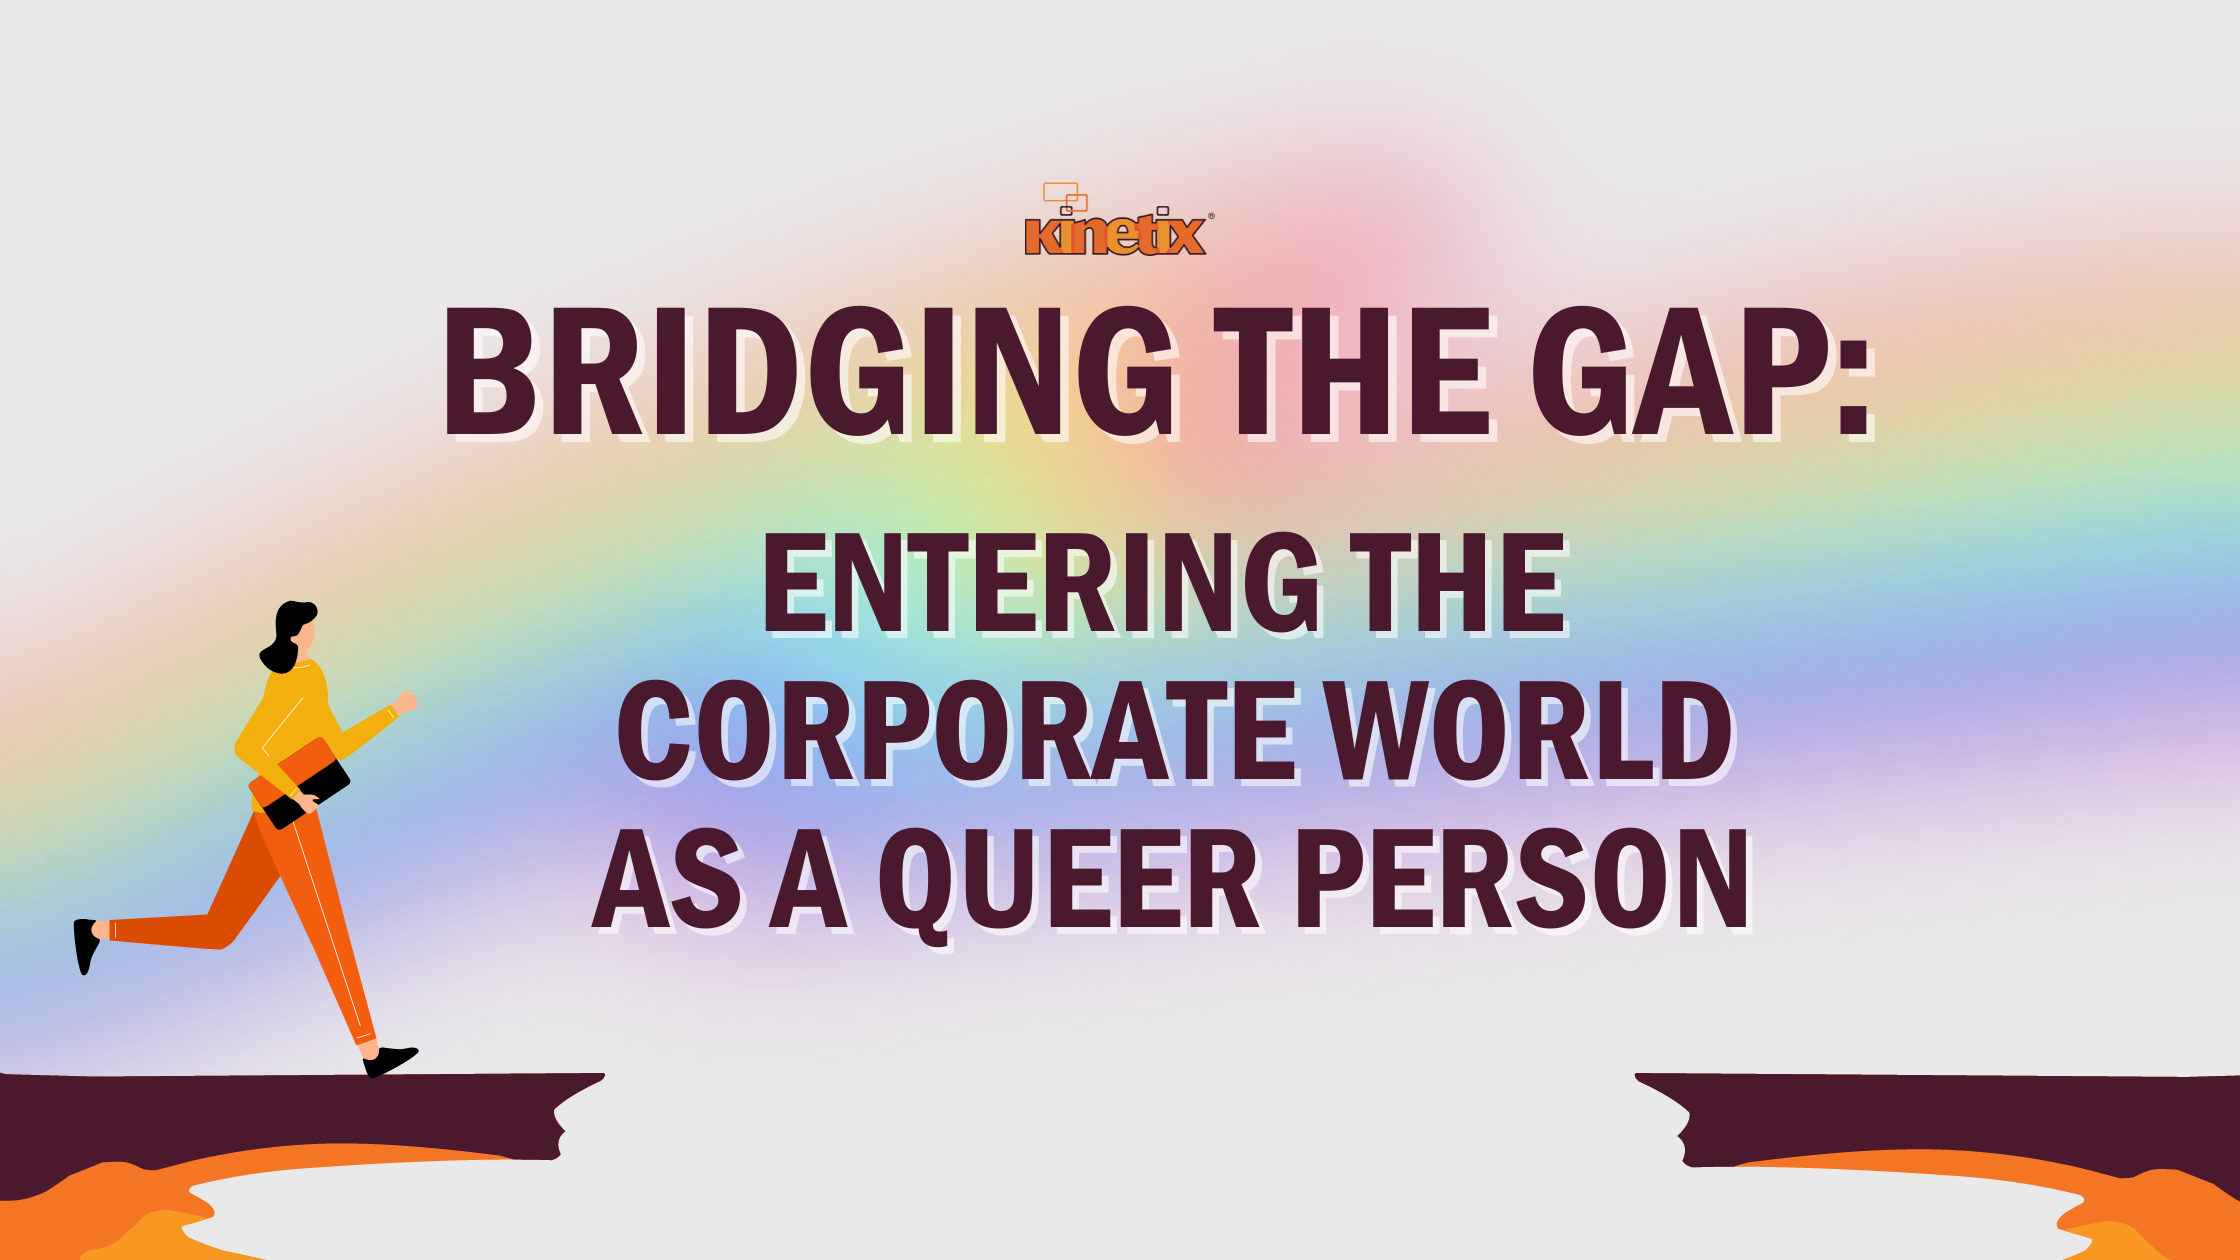 Bridging the Gap: Entering the Corporate World as a Queer Person